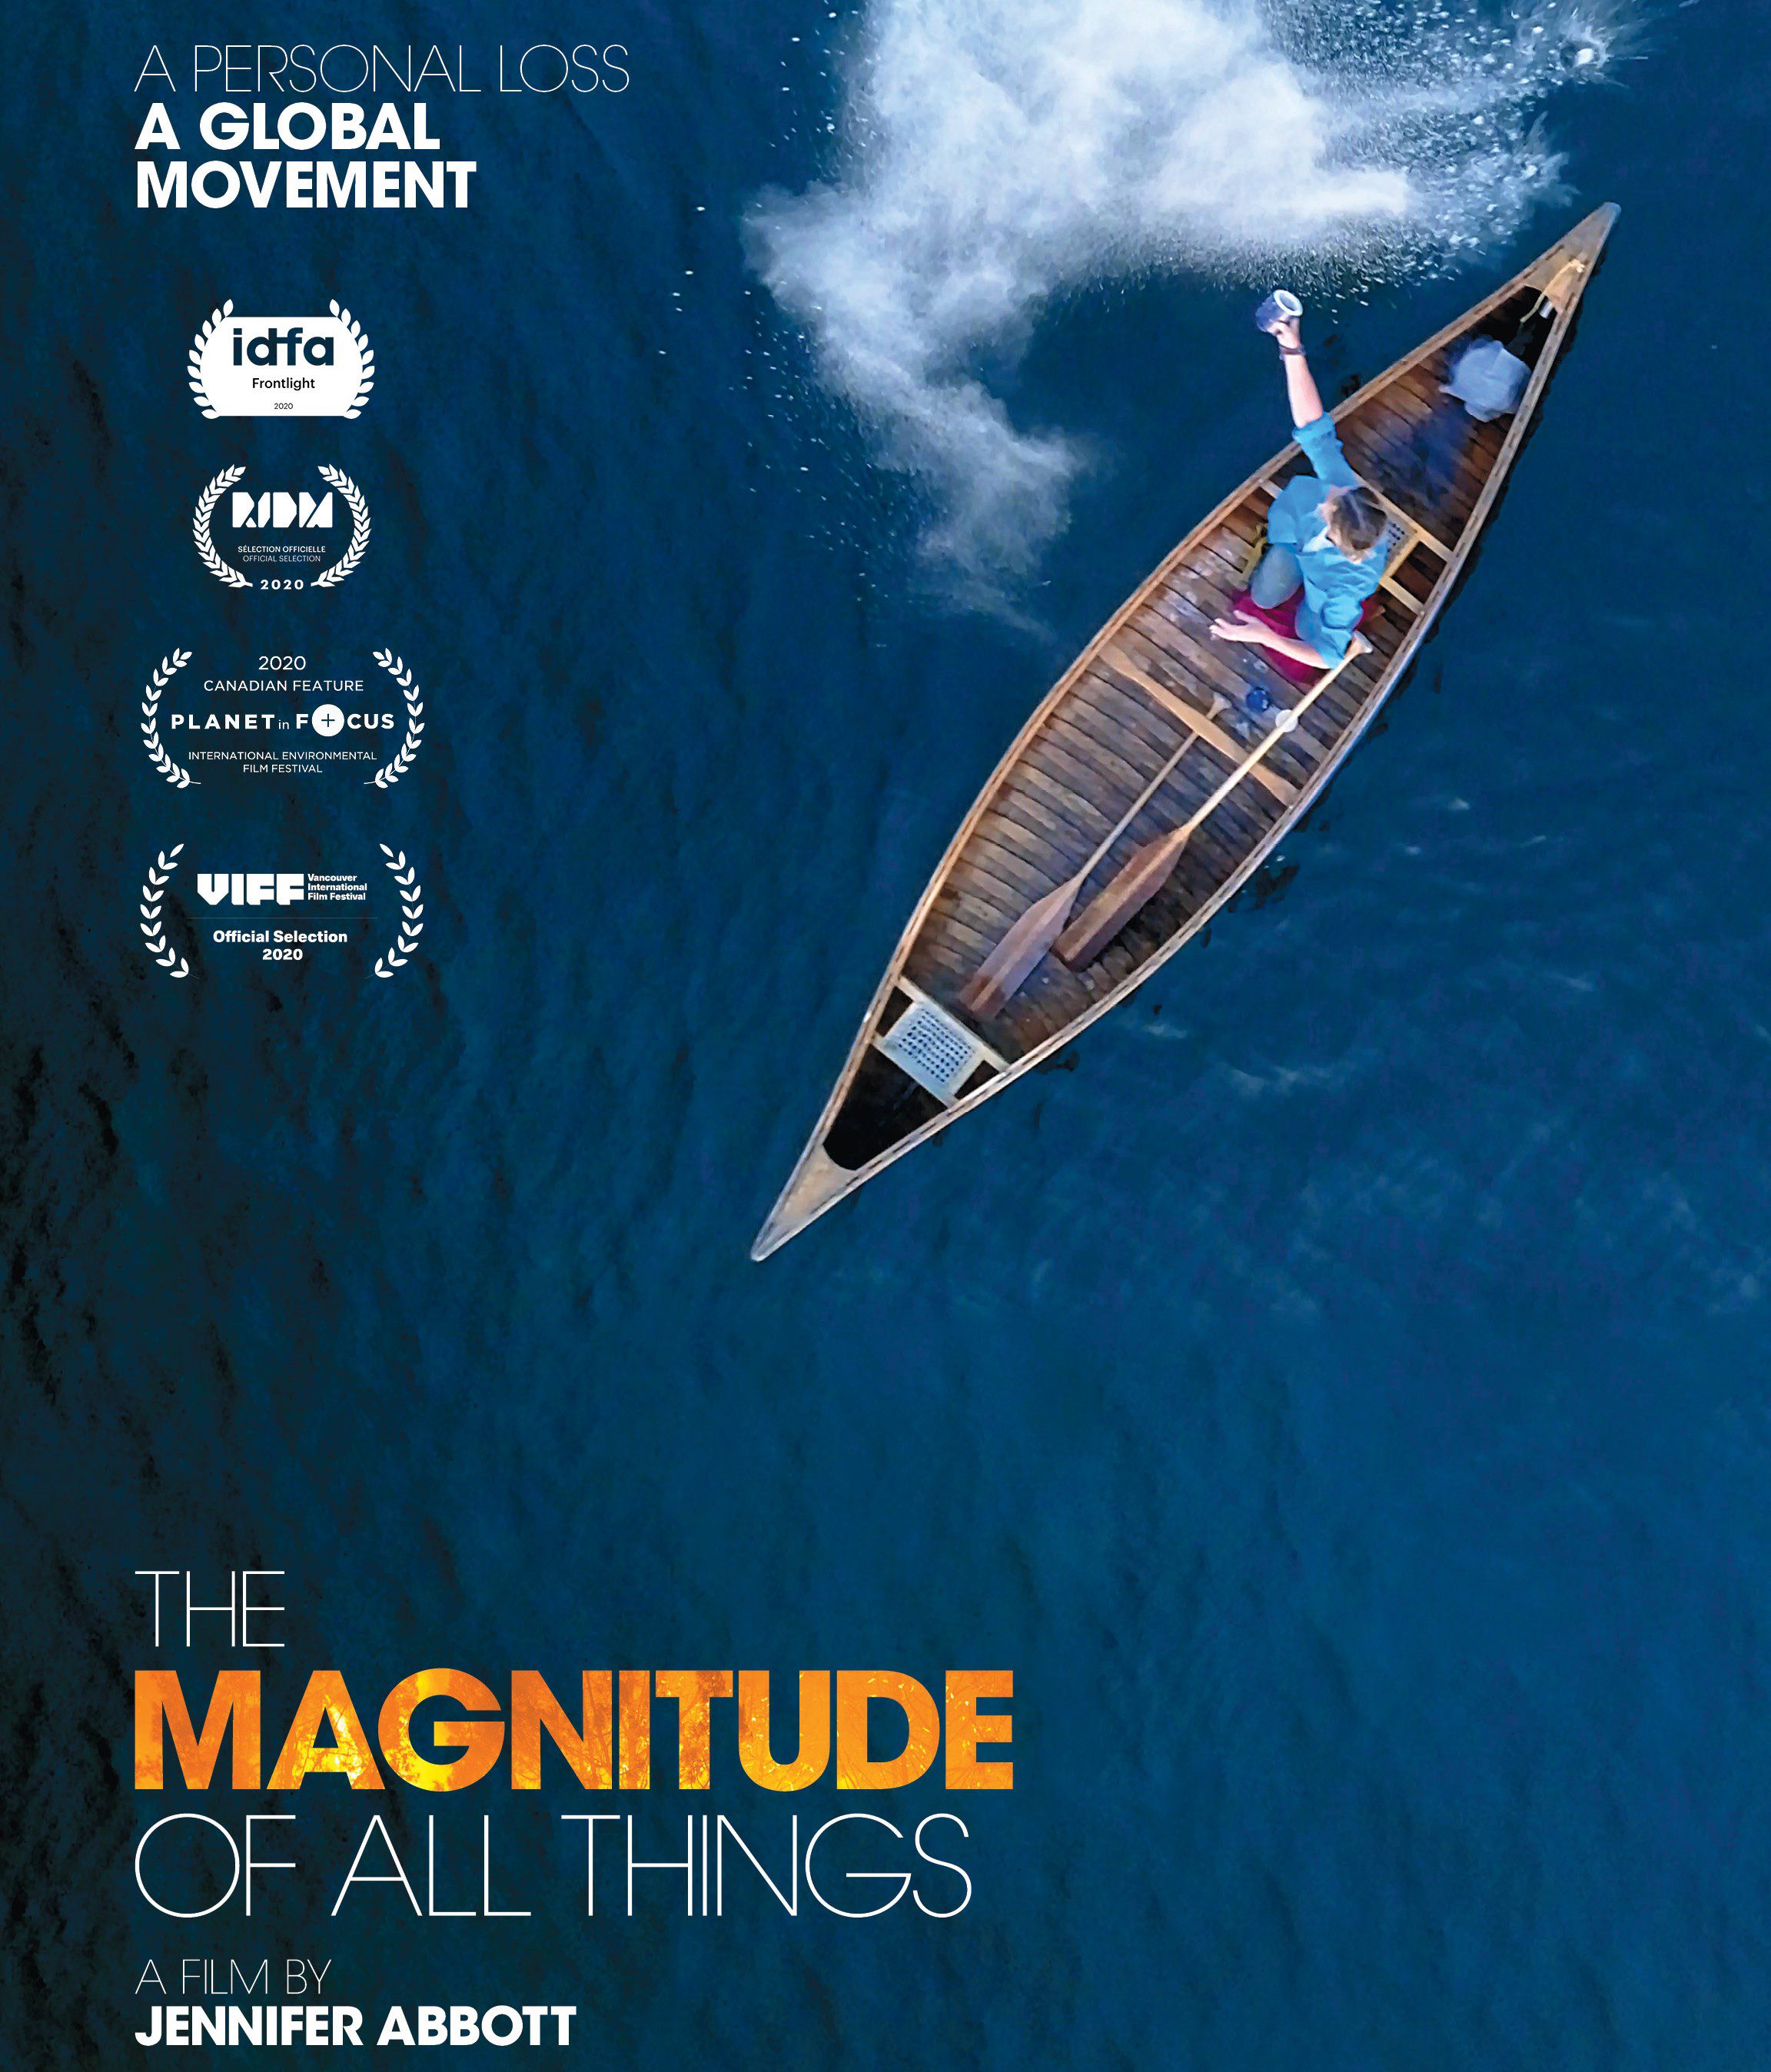 Canoe in middle of water with person spreading ashes in water. Text reads The Magnitude of All Things, a film by Jennifer Abbott.